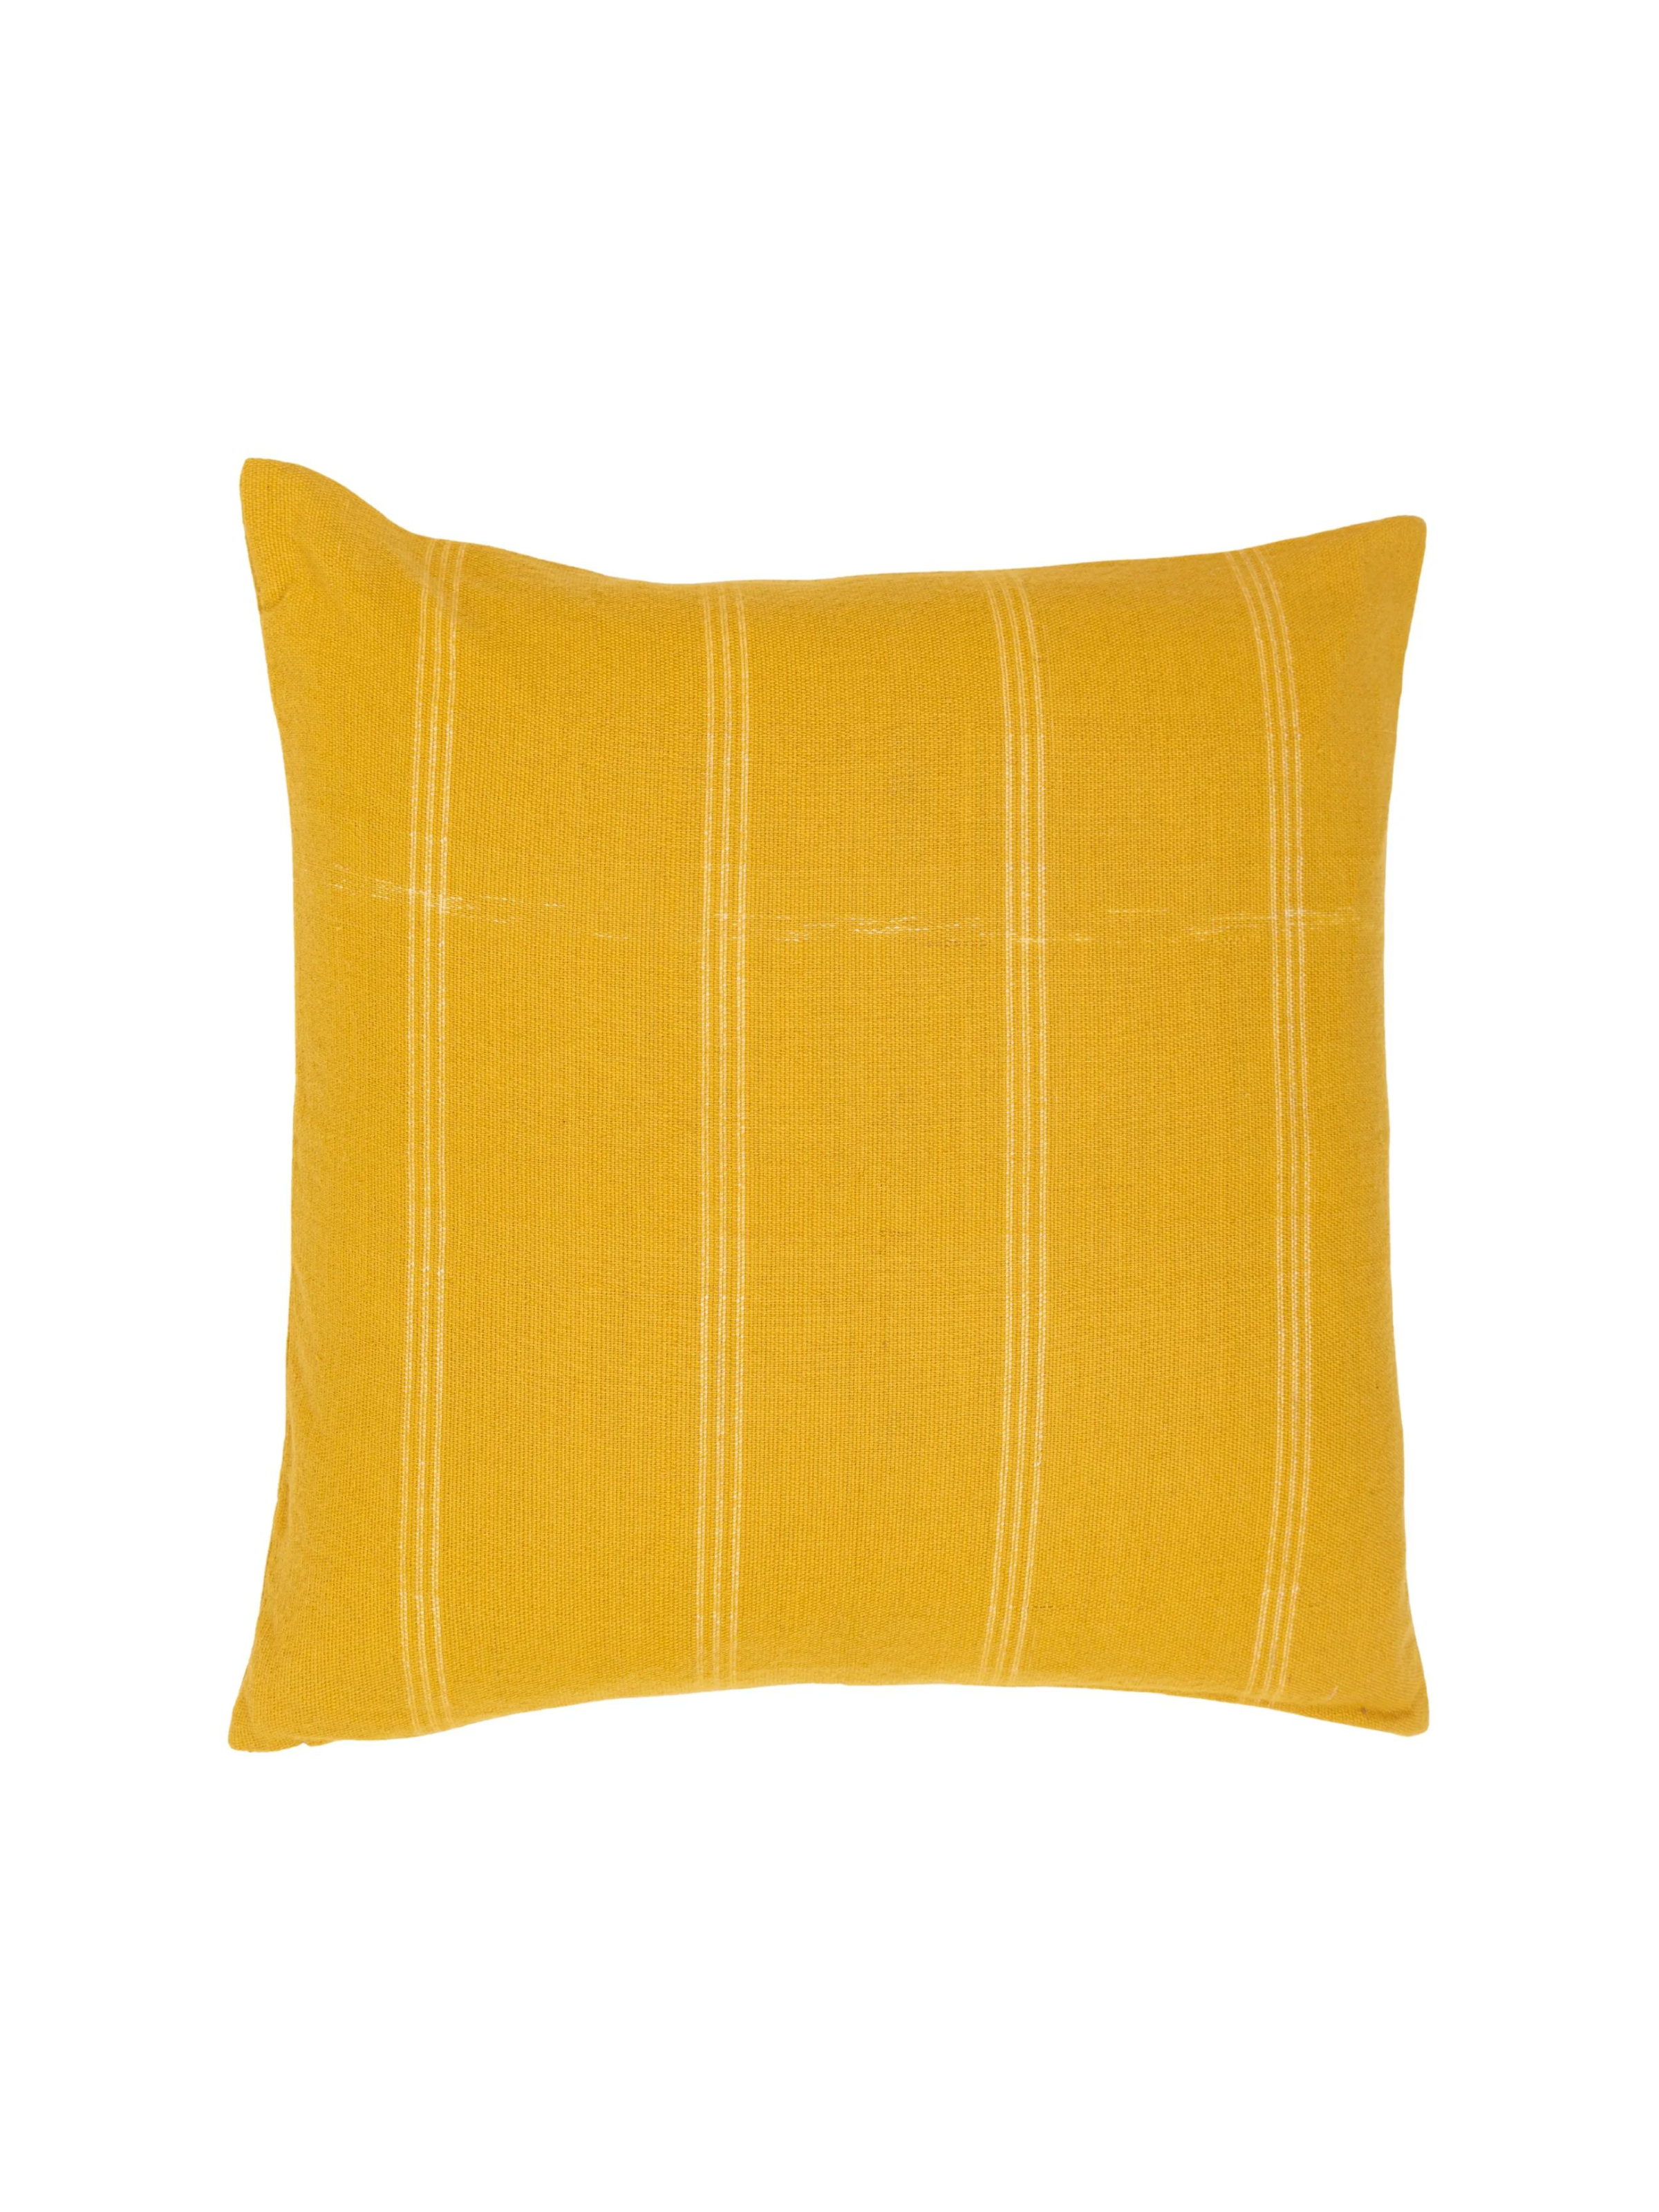 BK Tuscany Yellow Handwoven Pillow Cover